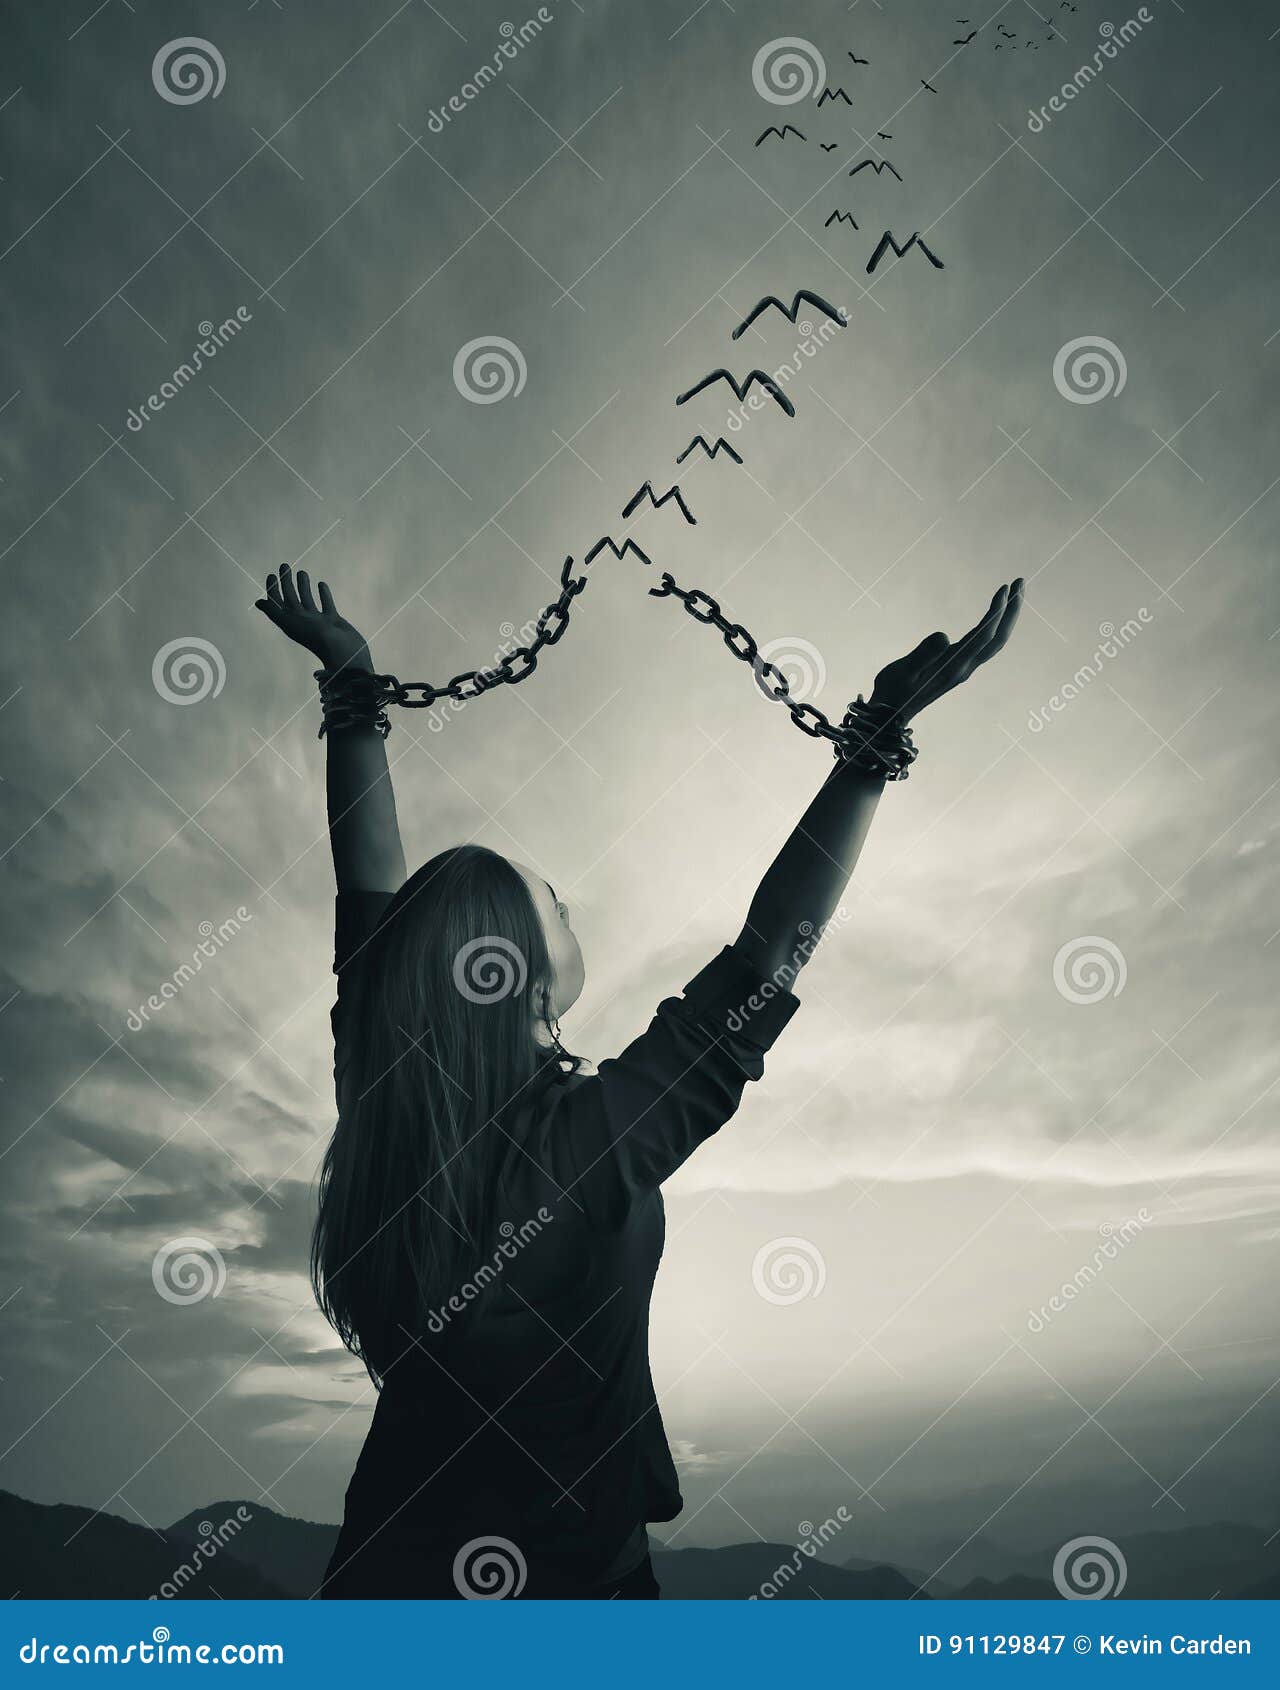 chains and freedom